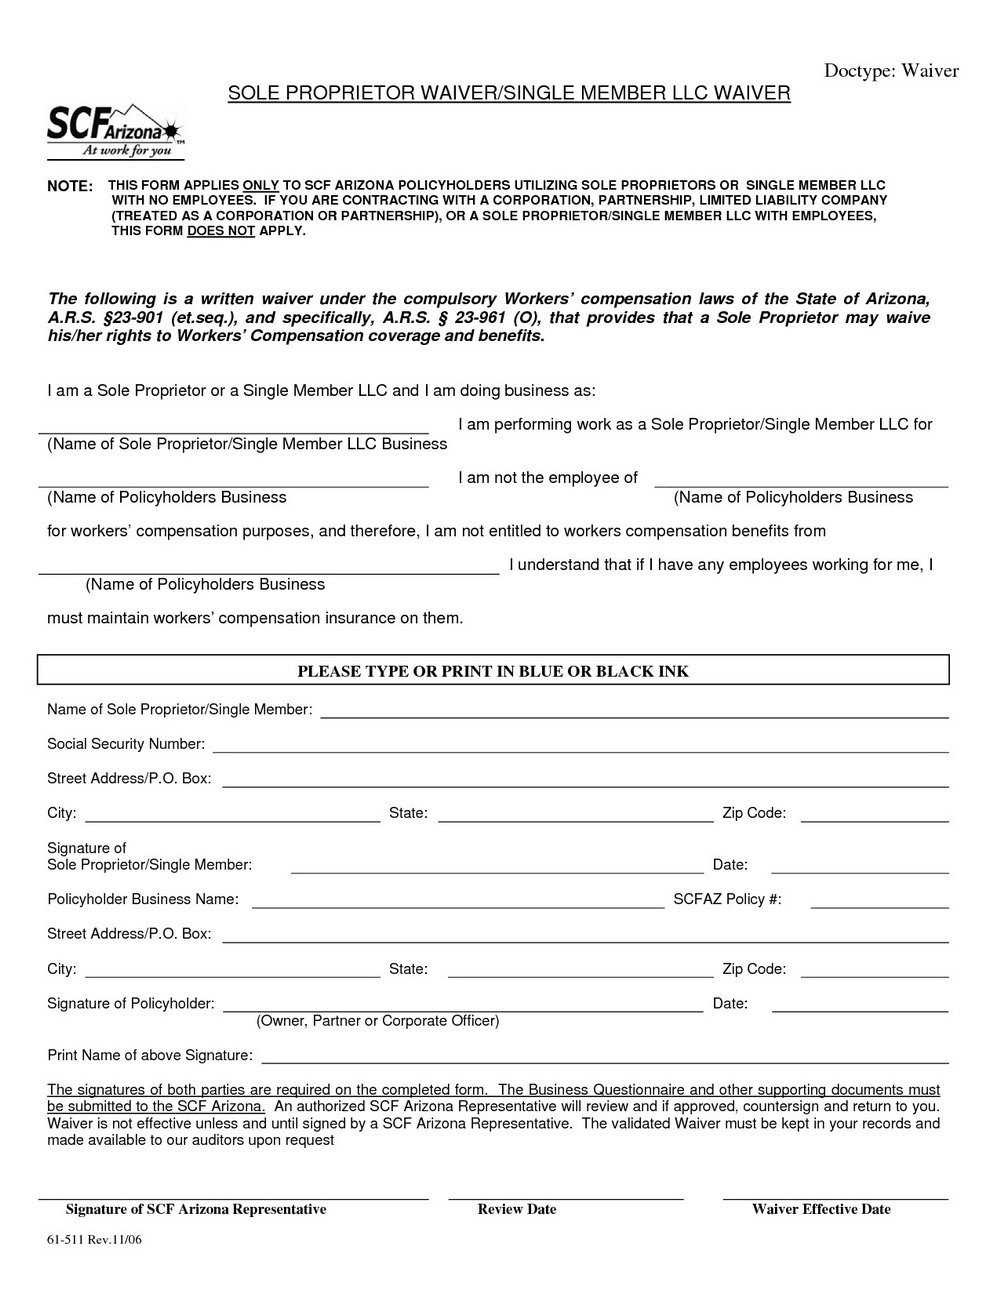 Workers pensation Waiver Form For Independent